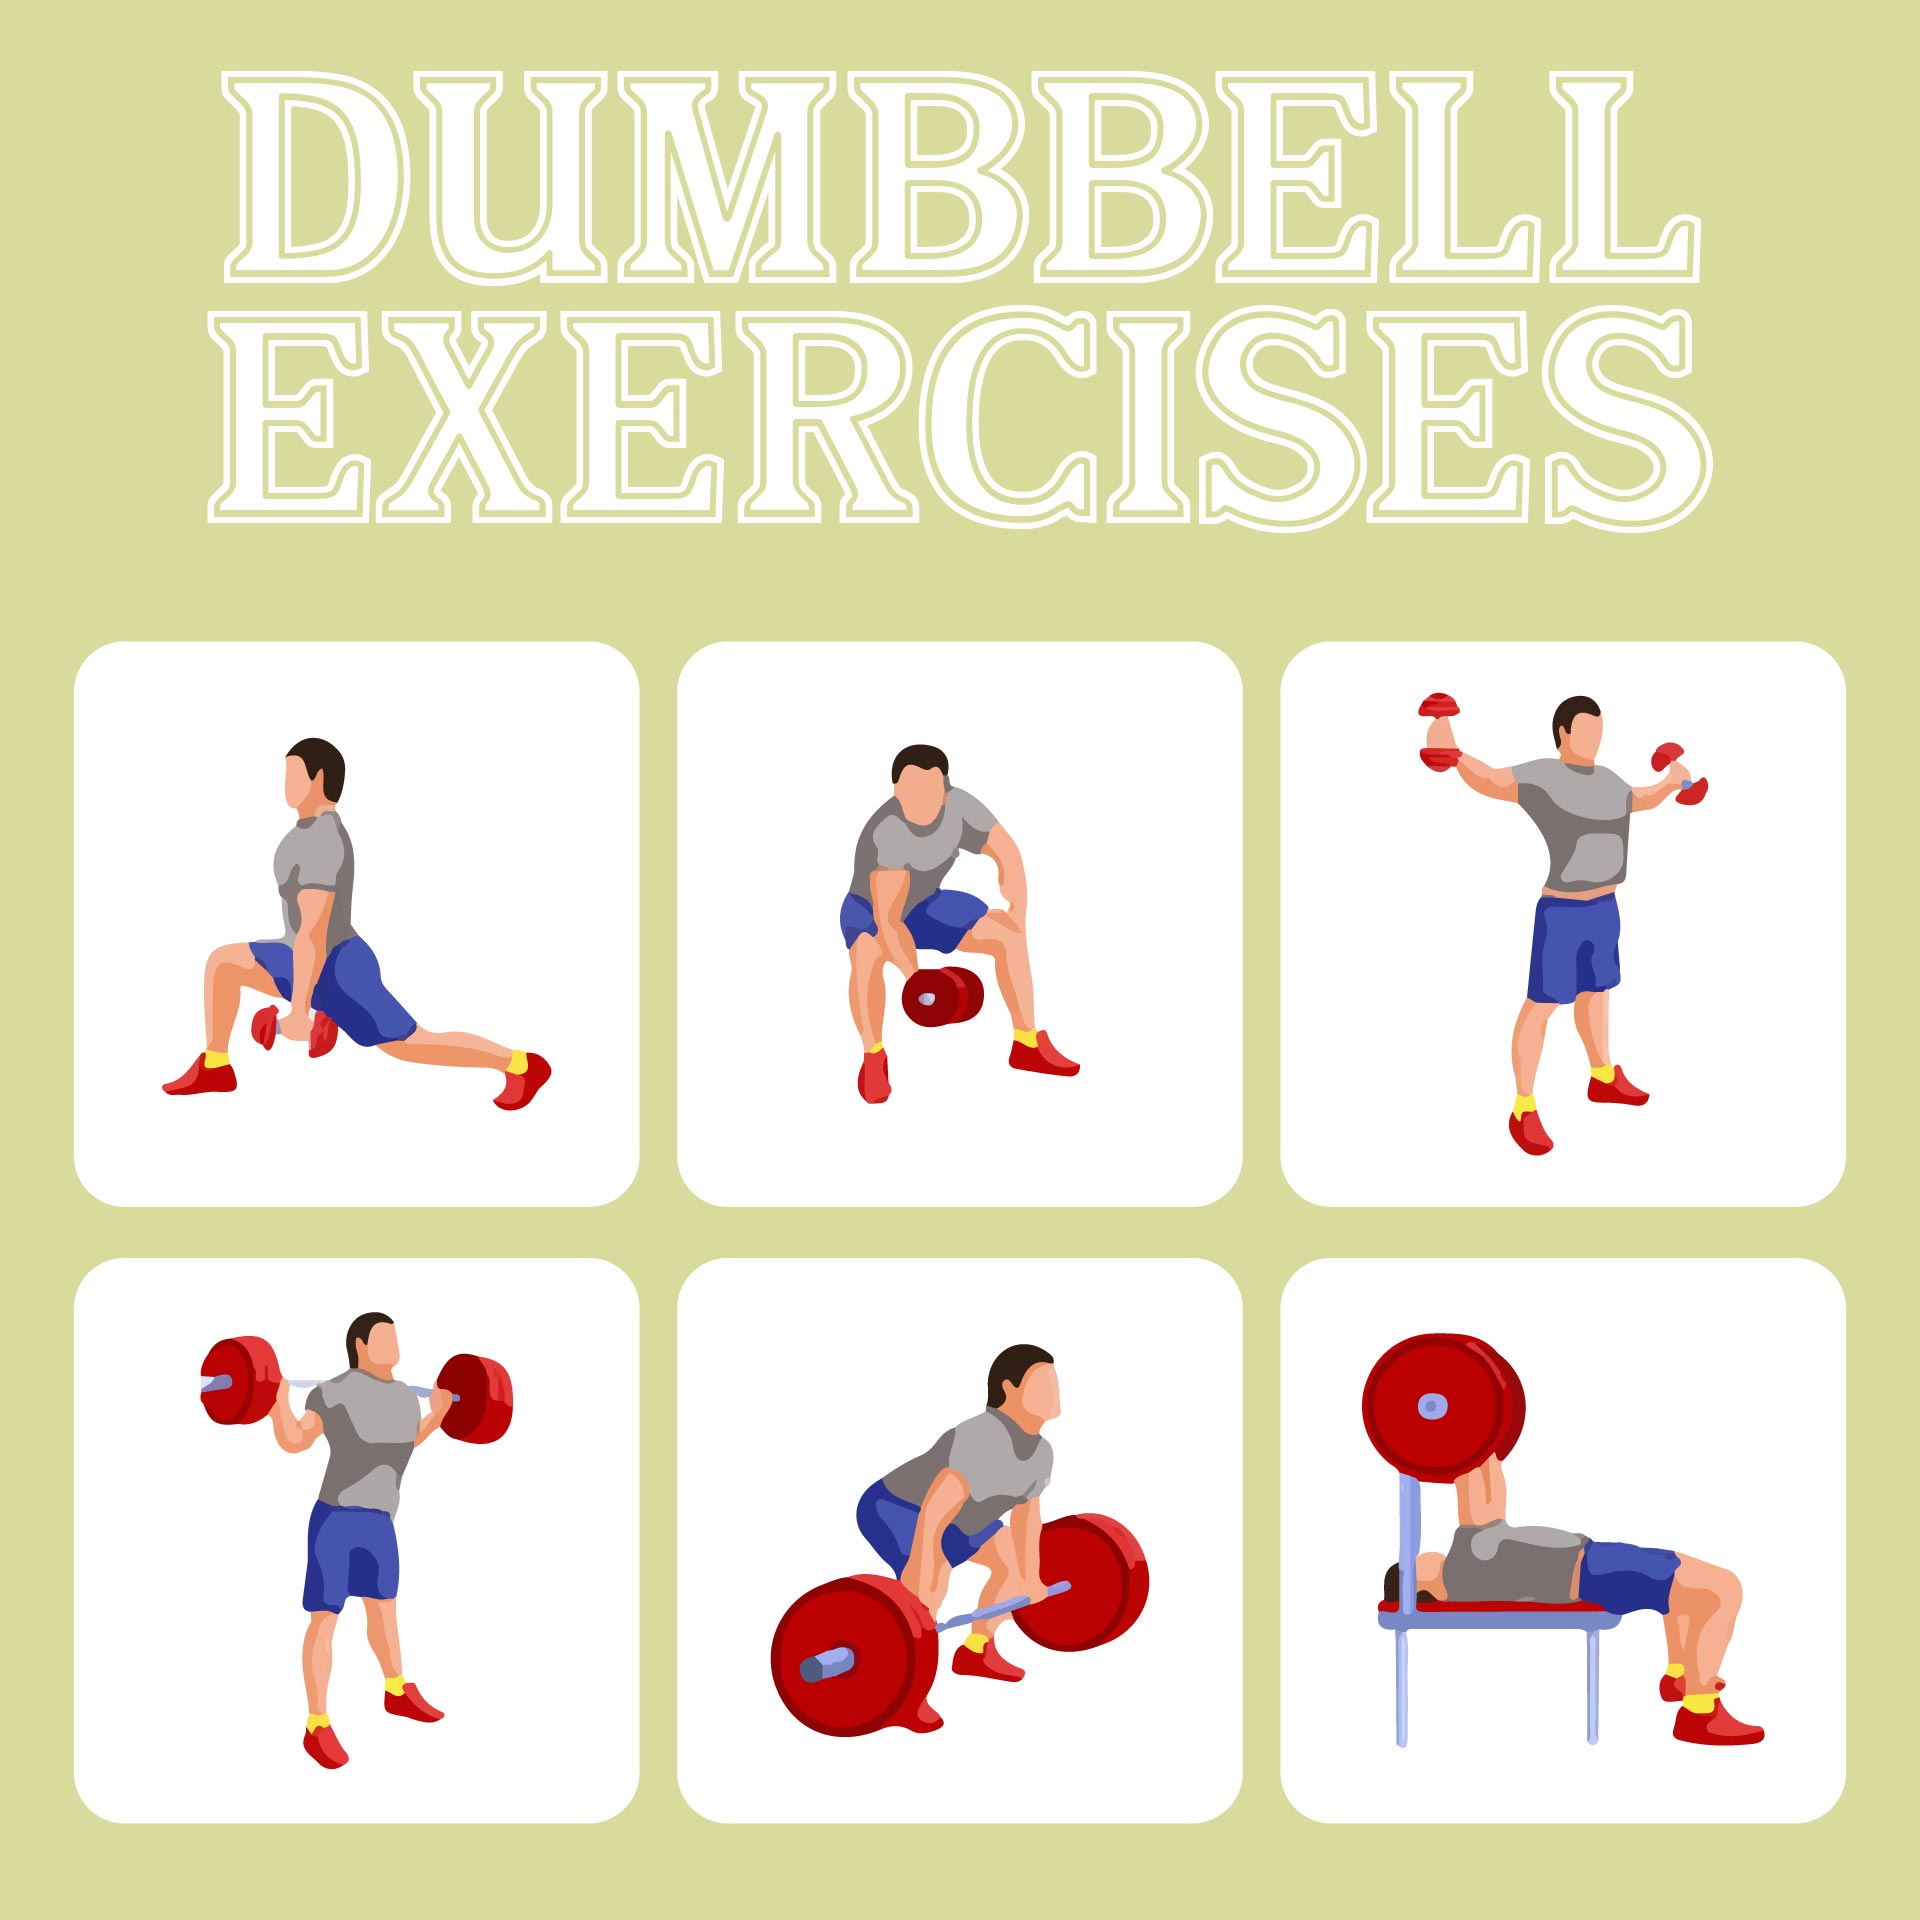 8 Best Images of Free Printable Dumbbell Workout Poster - Dumbbell ...